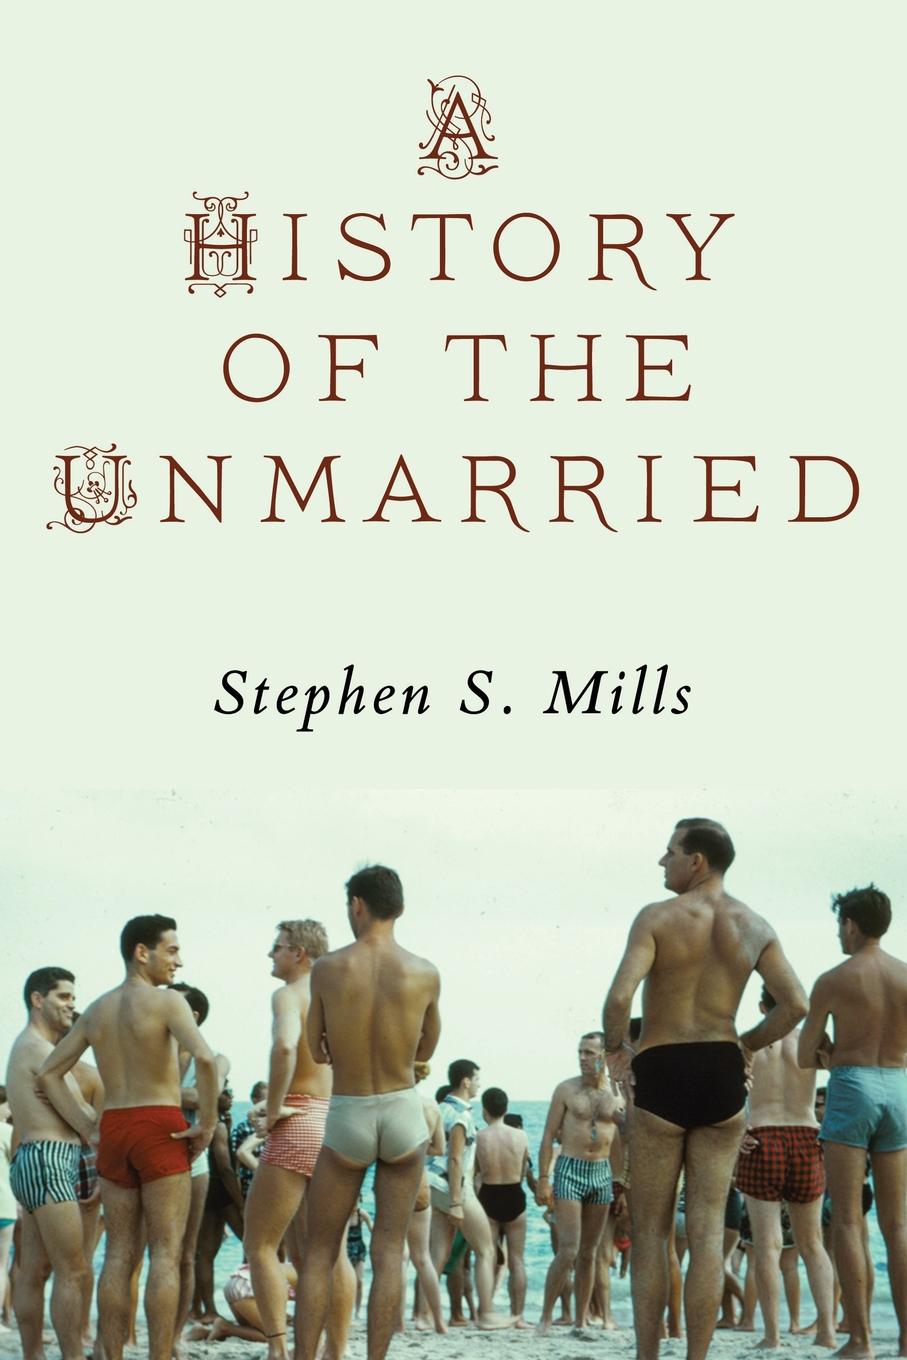 ALA Over the Rainbow Title! A History of the Unmarried by Stephen S